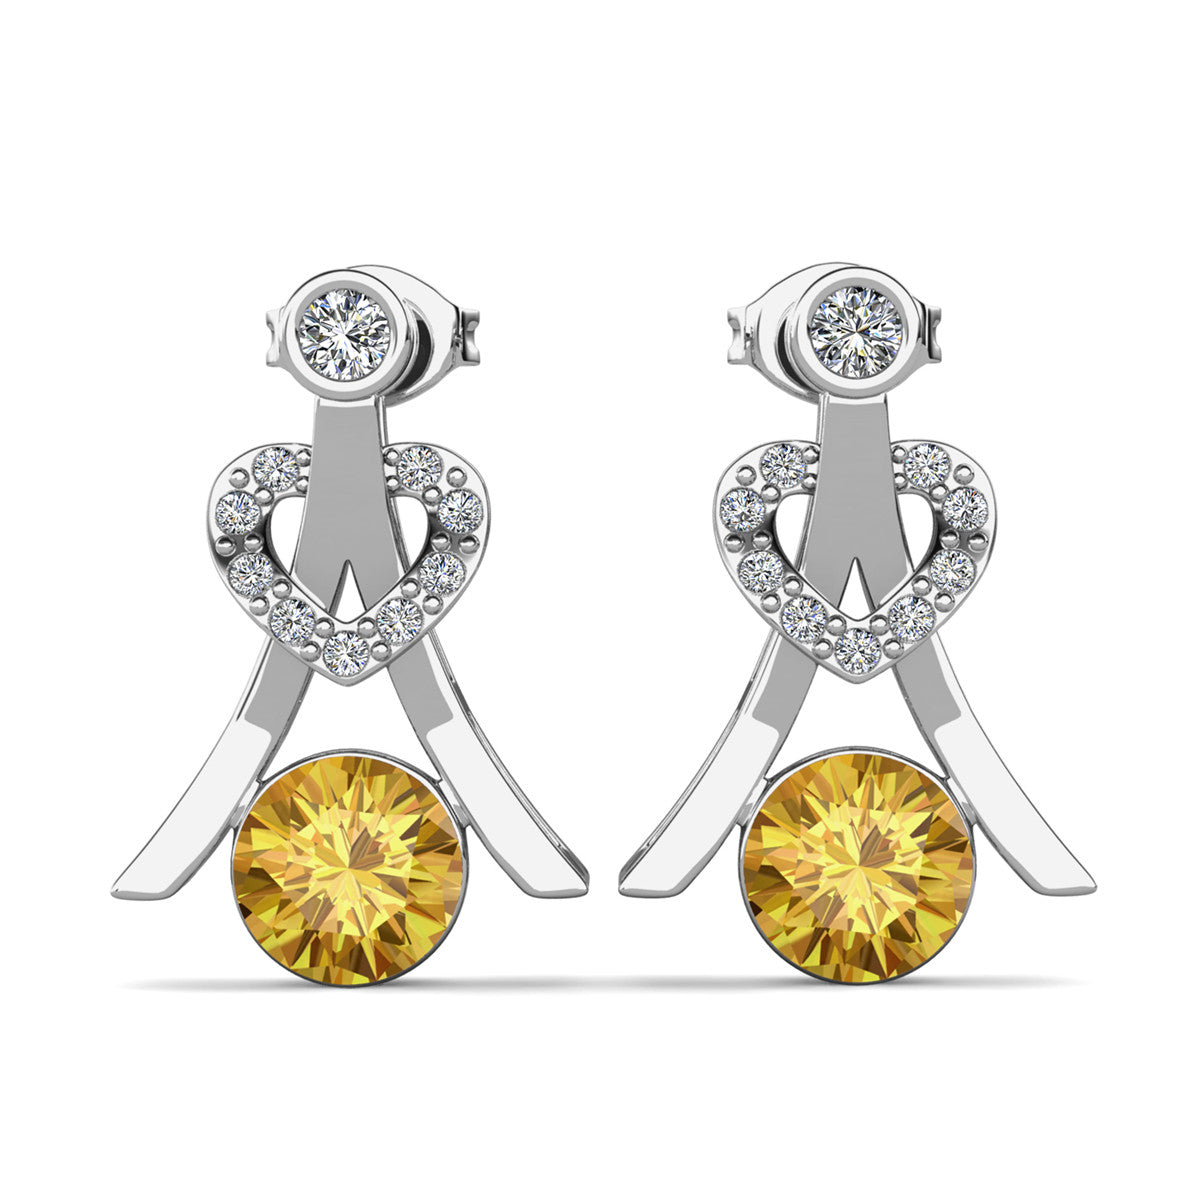 Serenity November Birthstone Citrine Earrings, 18k White Gold Plated Silver Earrings with Round Cut Crystals